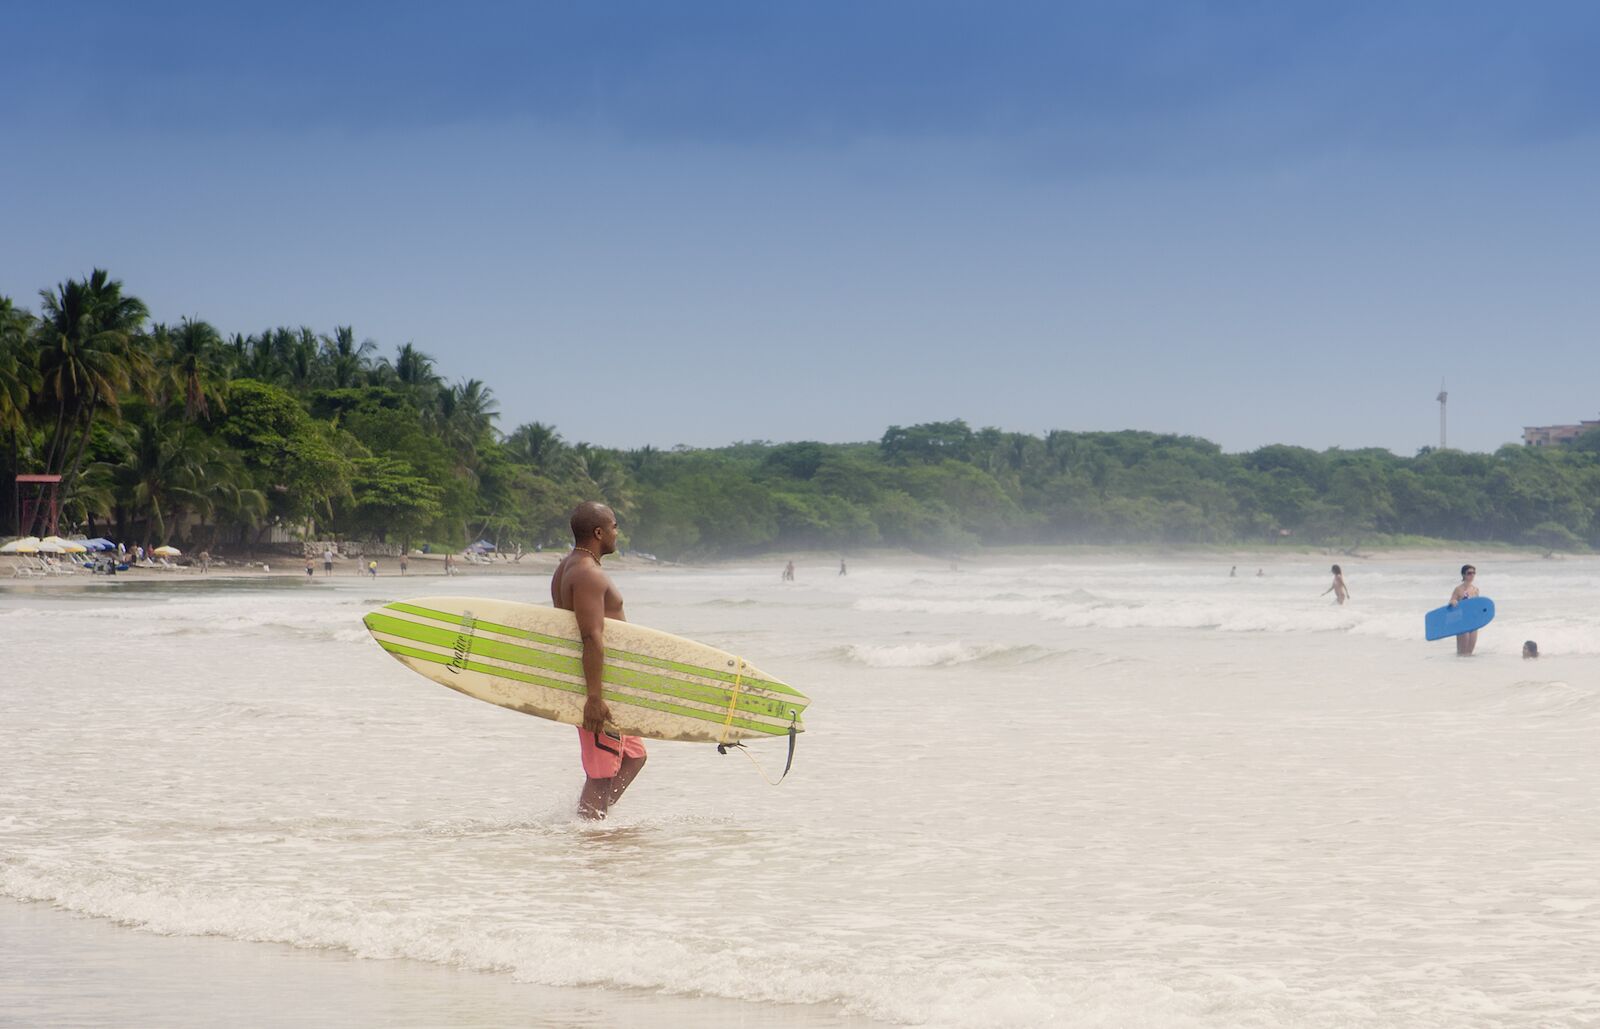 Man holding a surf board in Costa Rica. Read on to know more about the best time to visit Costa Rica and practise water sports like surfing and snorkeling